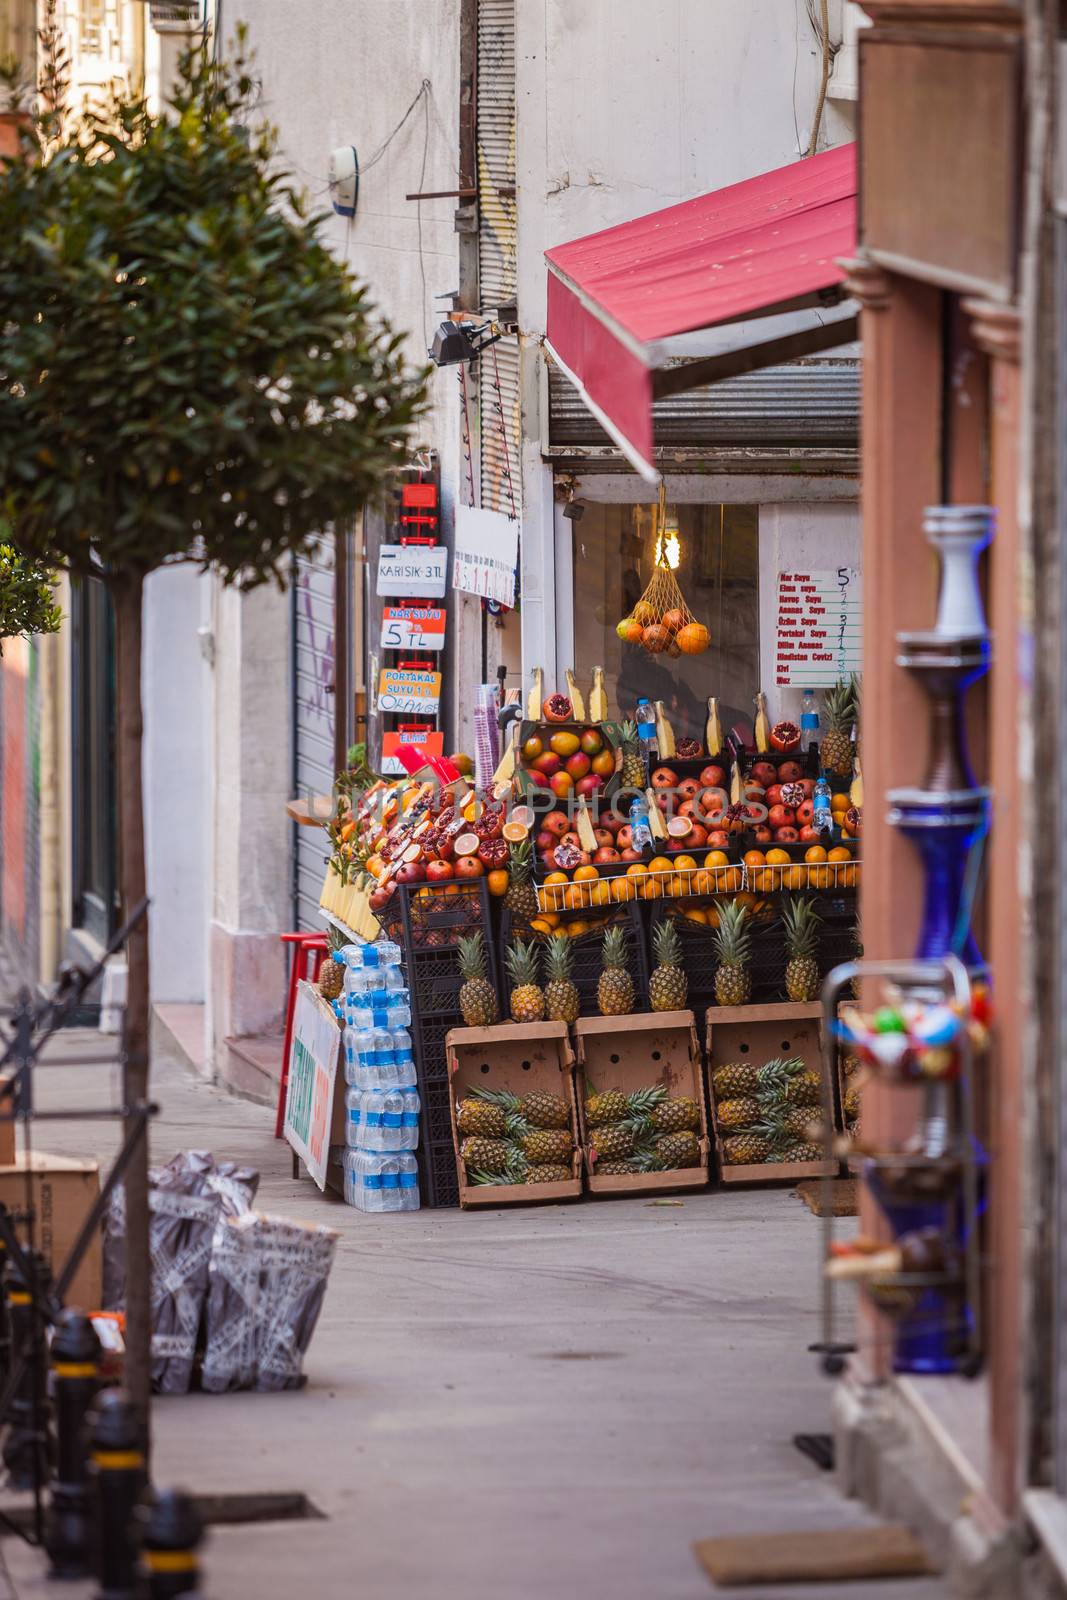 Istanbul Fruit Stand by Creatista